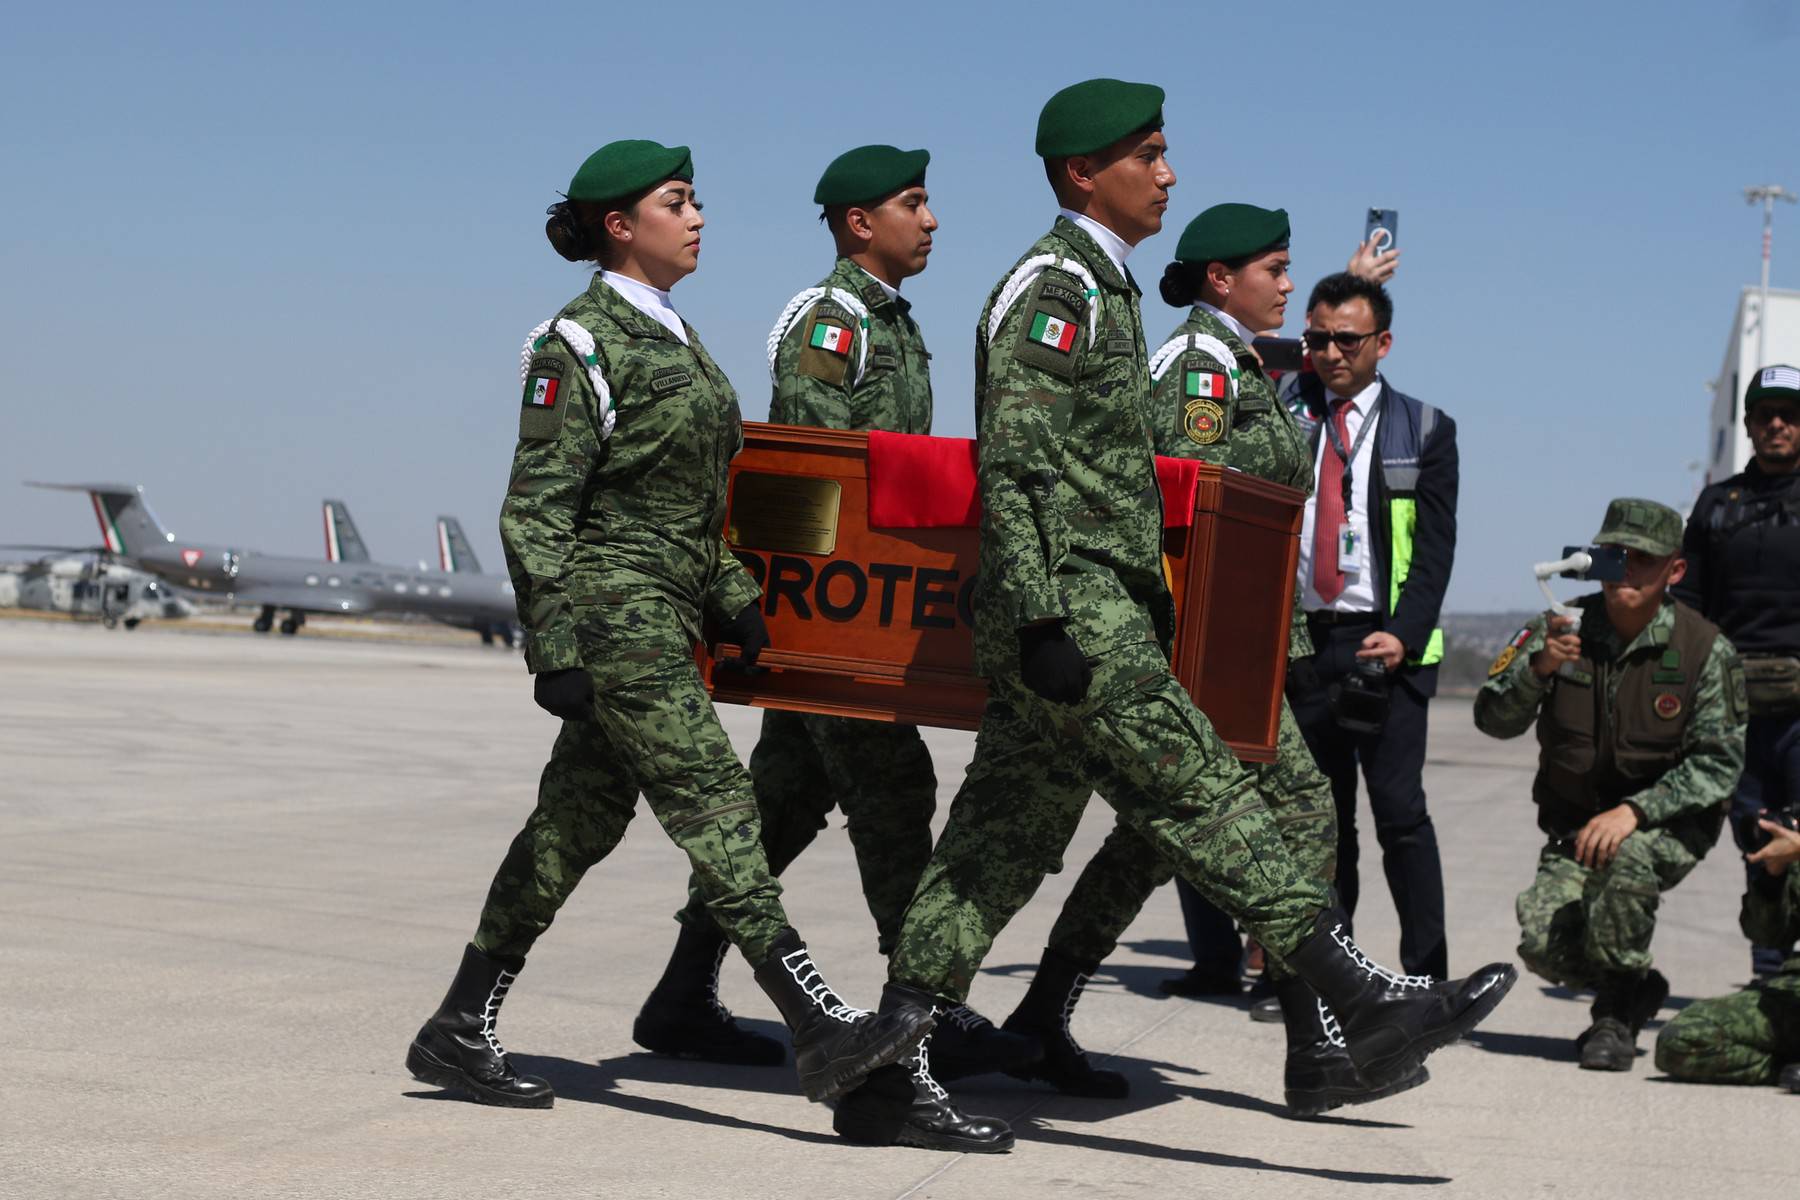 Remains of Rescue Dog 'Proteo' Arrive in Mexico, Mexico City, Mexico - 16 Feb 2023